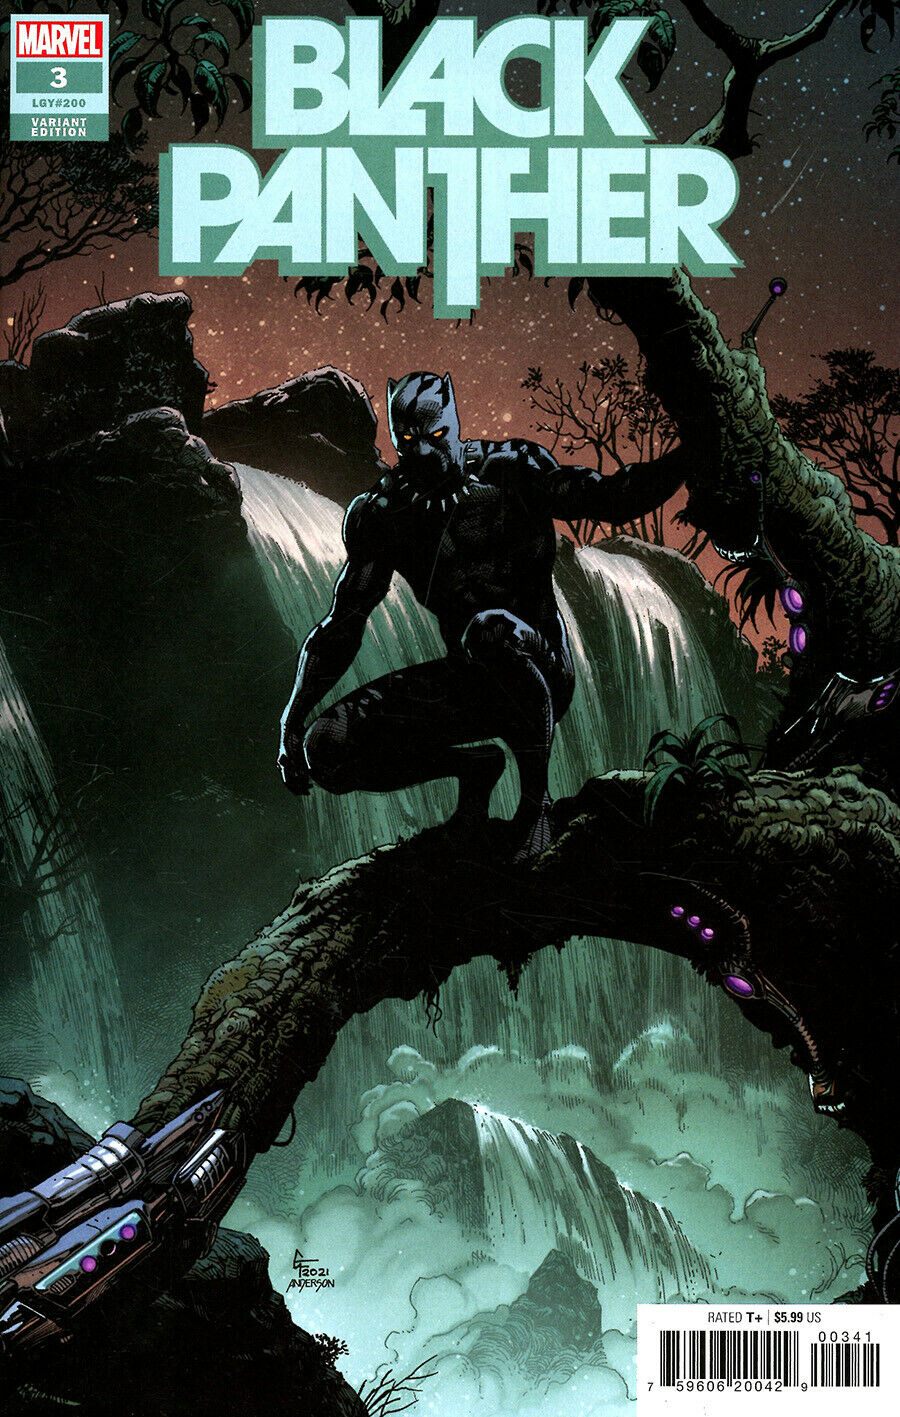 BLACK PANTHER #3 GARY FRANK VARIANT 1ST APP TOSIN ODUYE